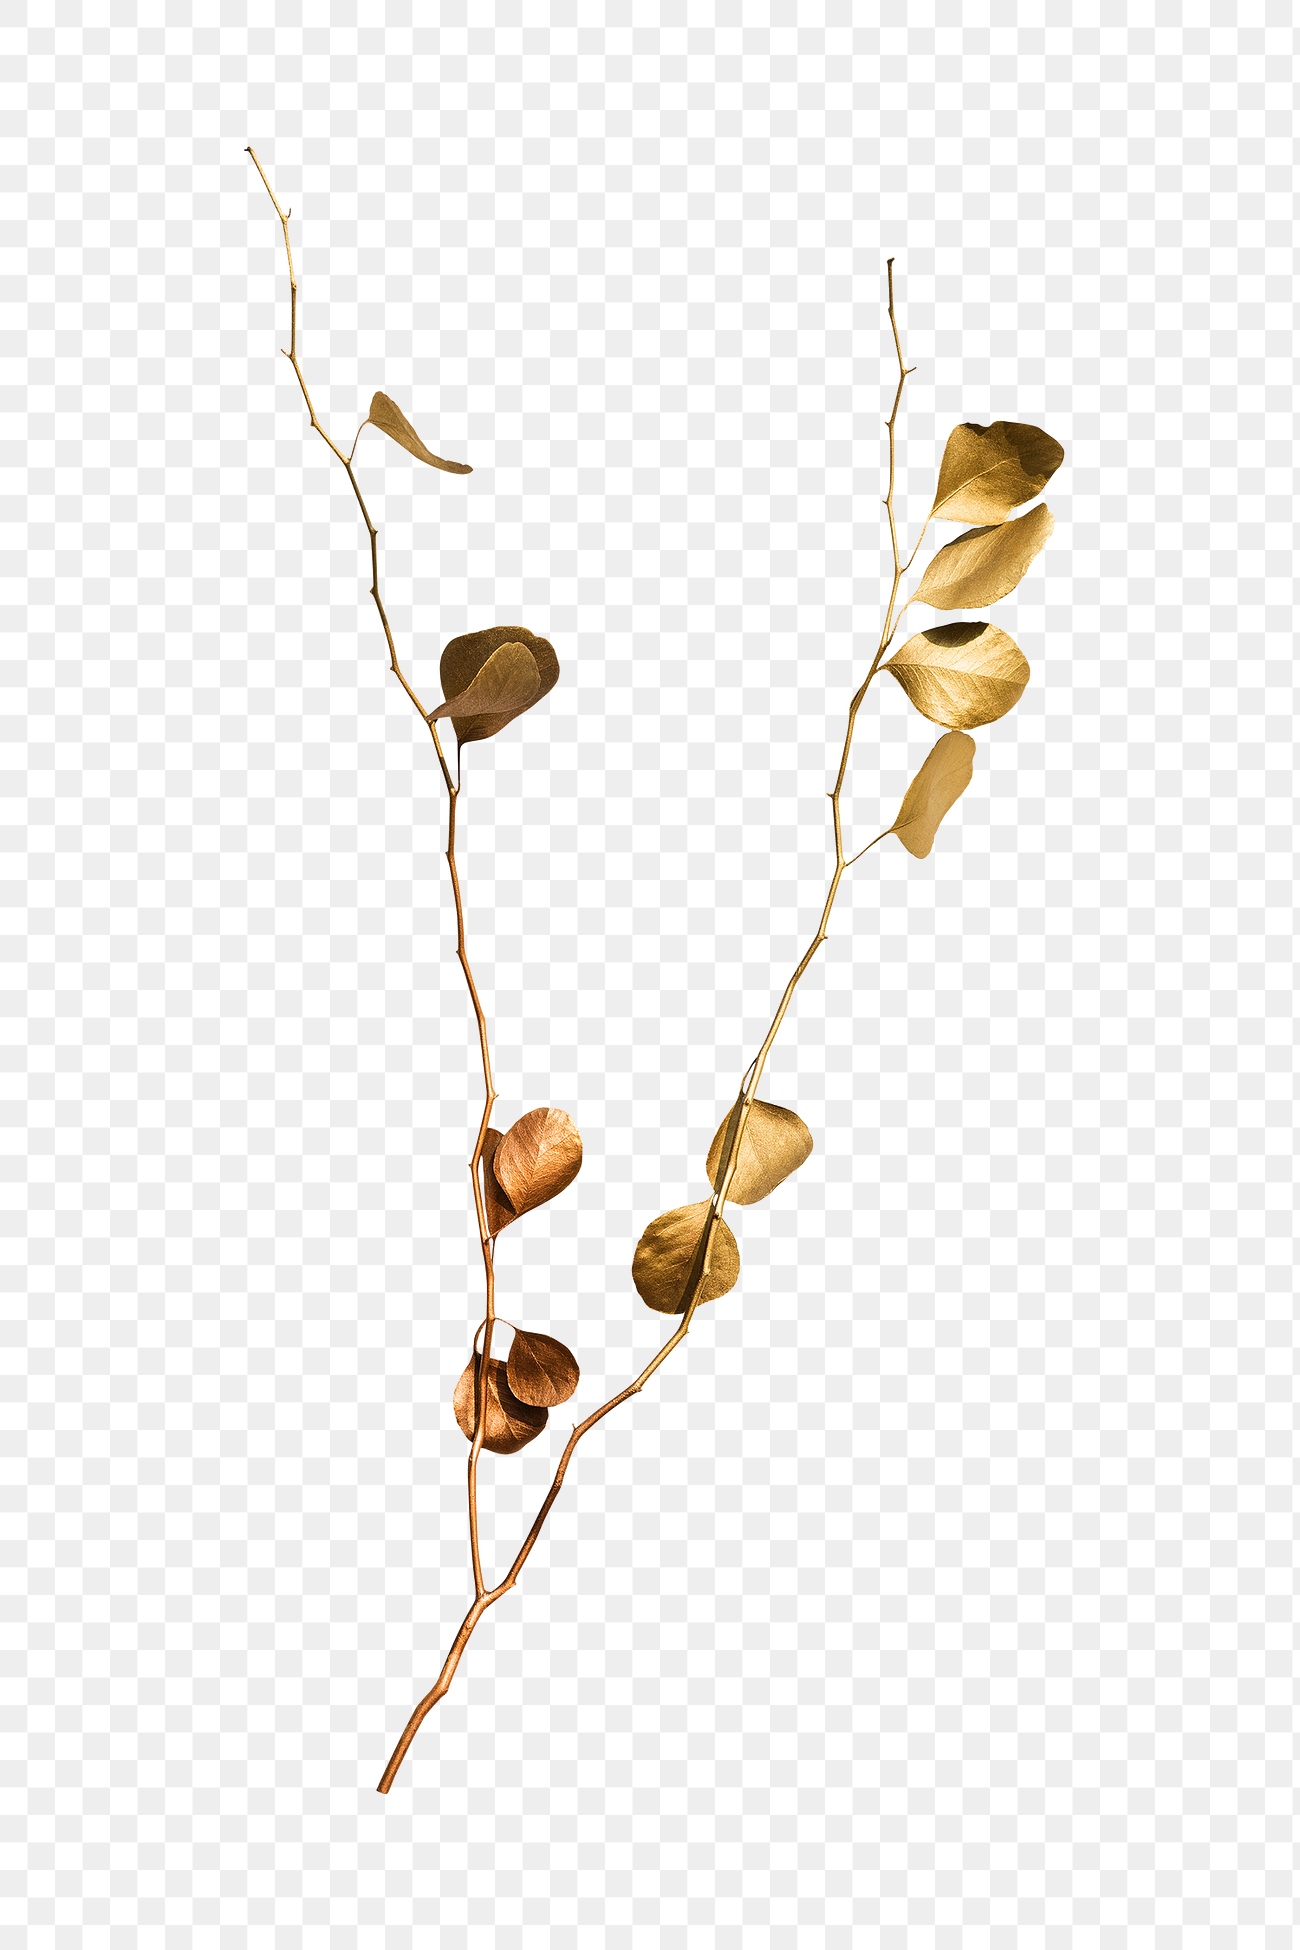 Eucalyptus round leaves painted in gold | Premium PNG Sticker - rawpixel